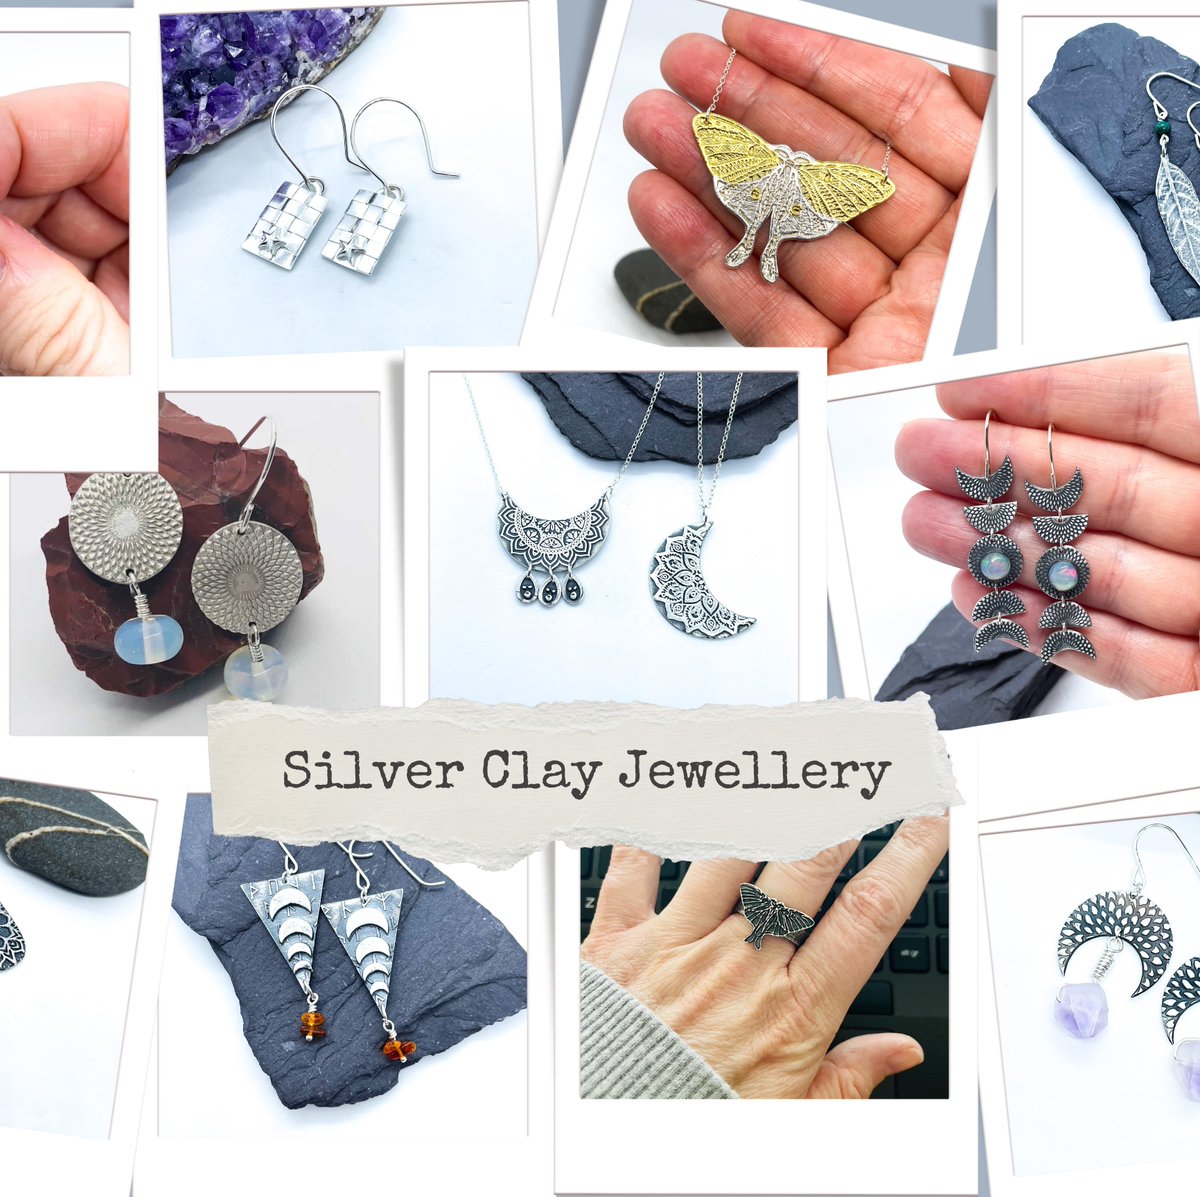 Uncover the captivating history and intricate artistry of silver clay creations. Explore our blog post to unravel the magic! 💍✨ @TheBeadedMagpie 

vist.ly/y774+
#SilverClayArt #JewelleryHistory #CraftsmanshipMagic